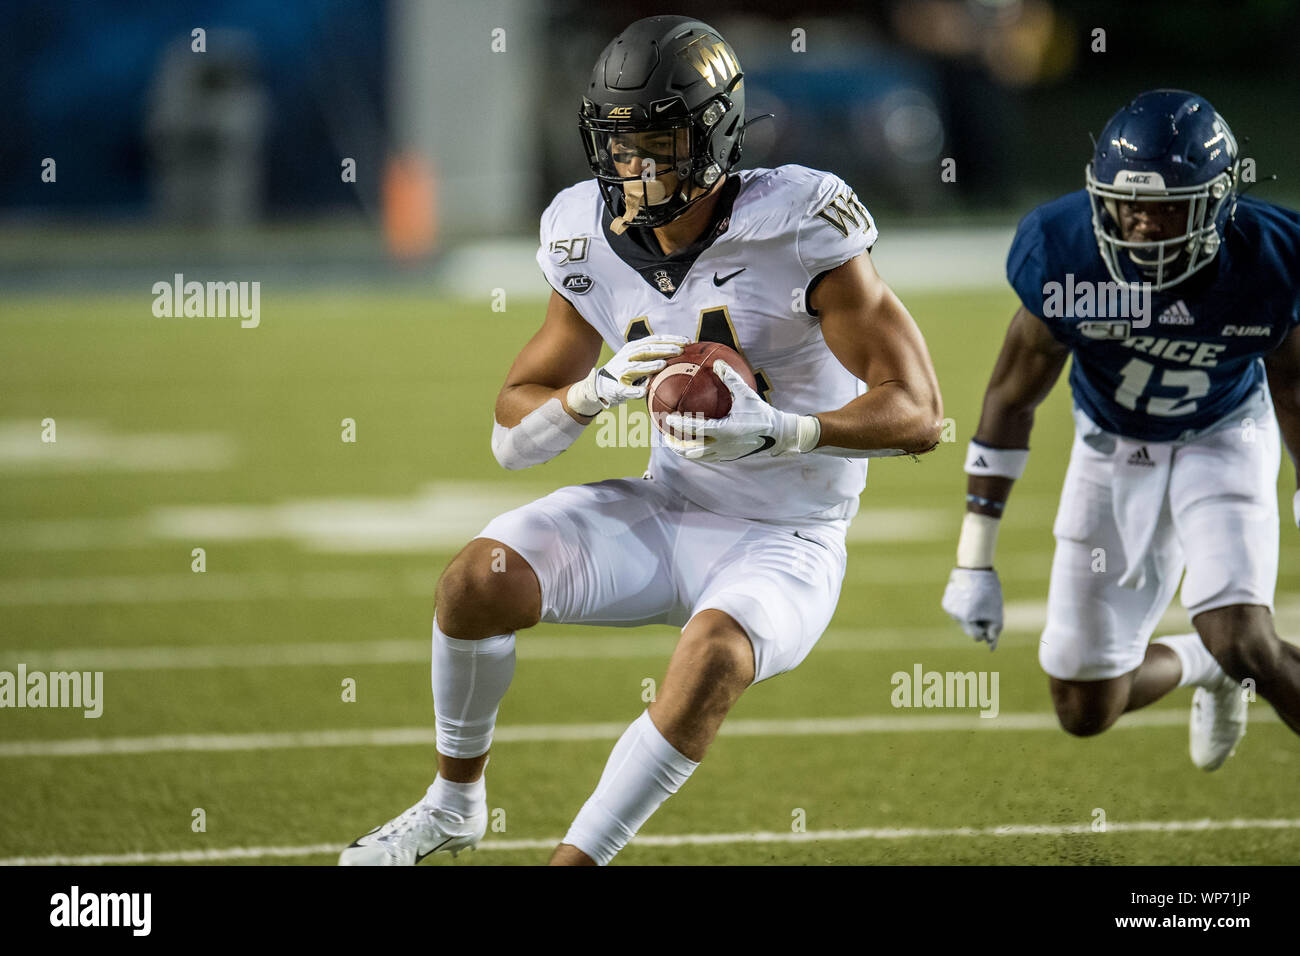 Houston, TX, USA. 6th Sep, 2019. Wake Forest Demon Deacons wide receiver Sage Surratt (14) makes a catch in front of Rice Owls defensive back D'Angelo Ellis (12) during the 1st quarter of an NCAA football game between the Wake Forest Demon Deacons and the Rice Owls at Rice Stadium in Houston, TX. Wake Forest won the game 41 to 21.Trask Smith/CSM/Alamy Live News Stock Photo